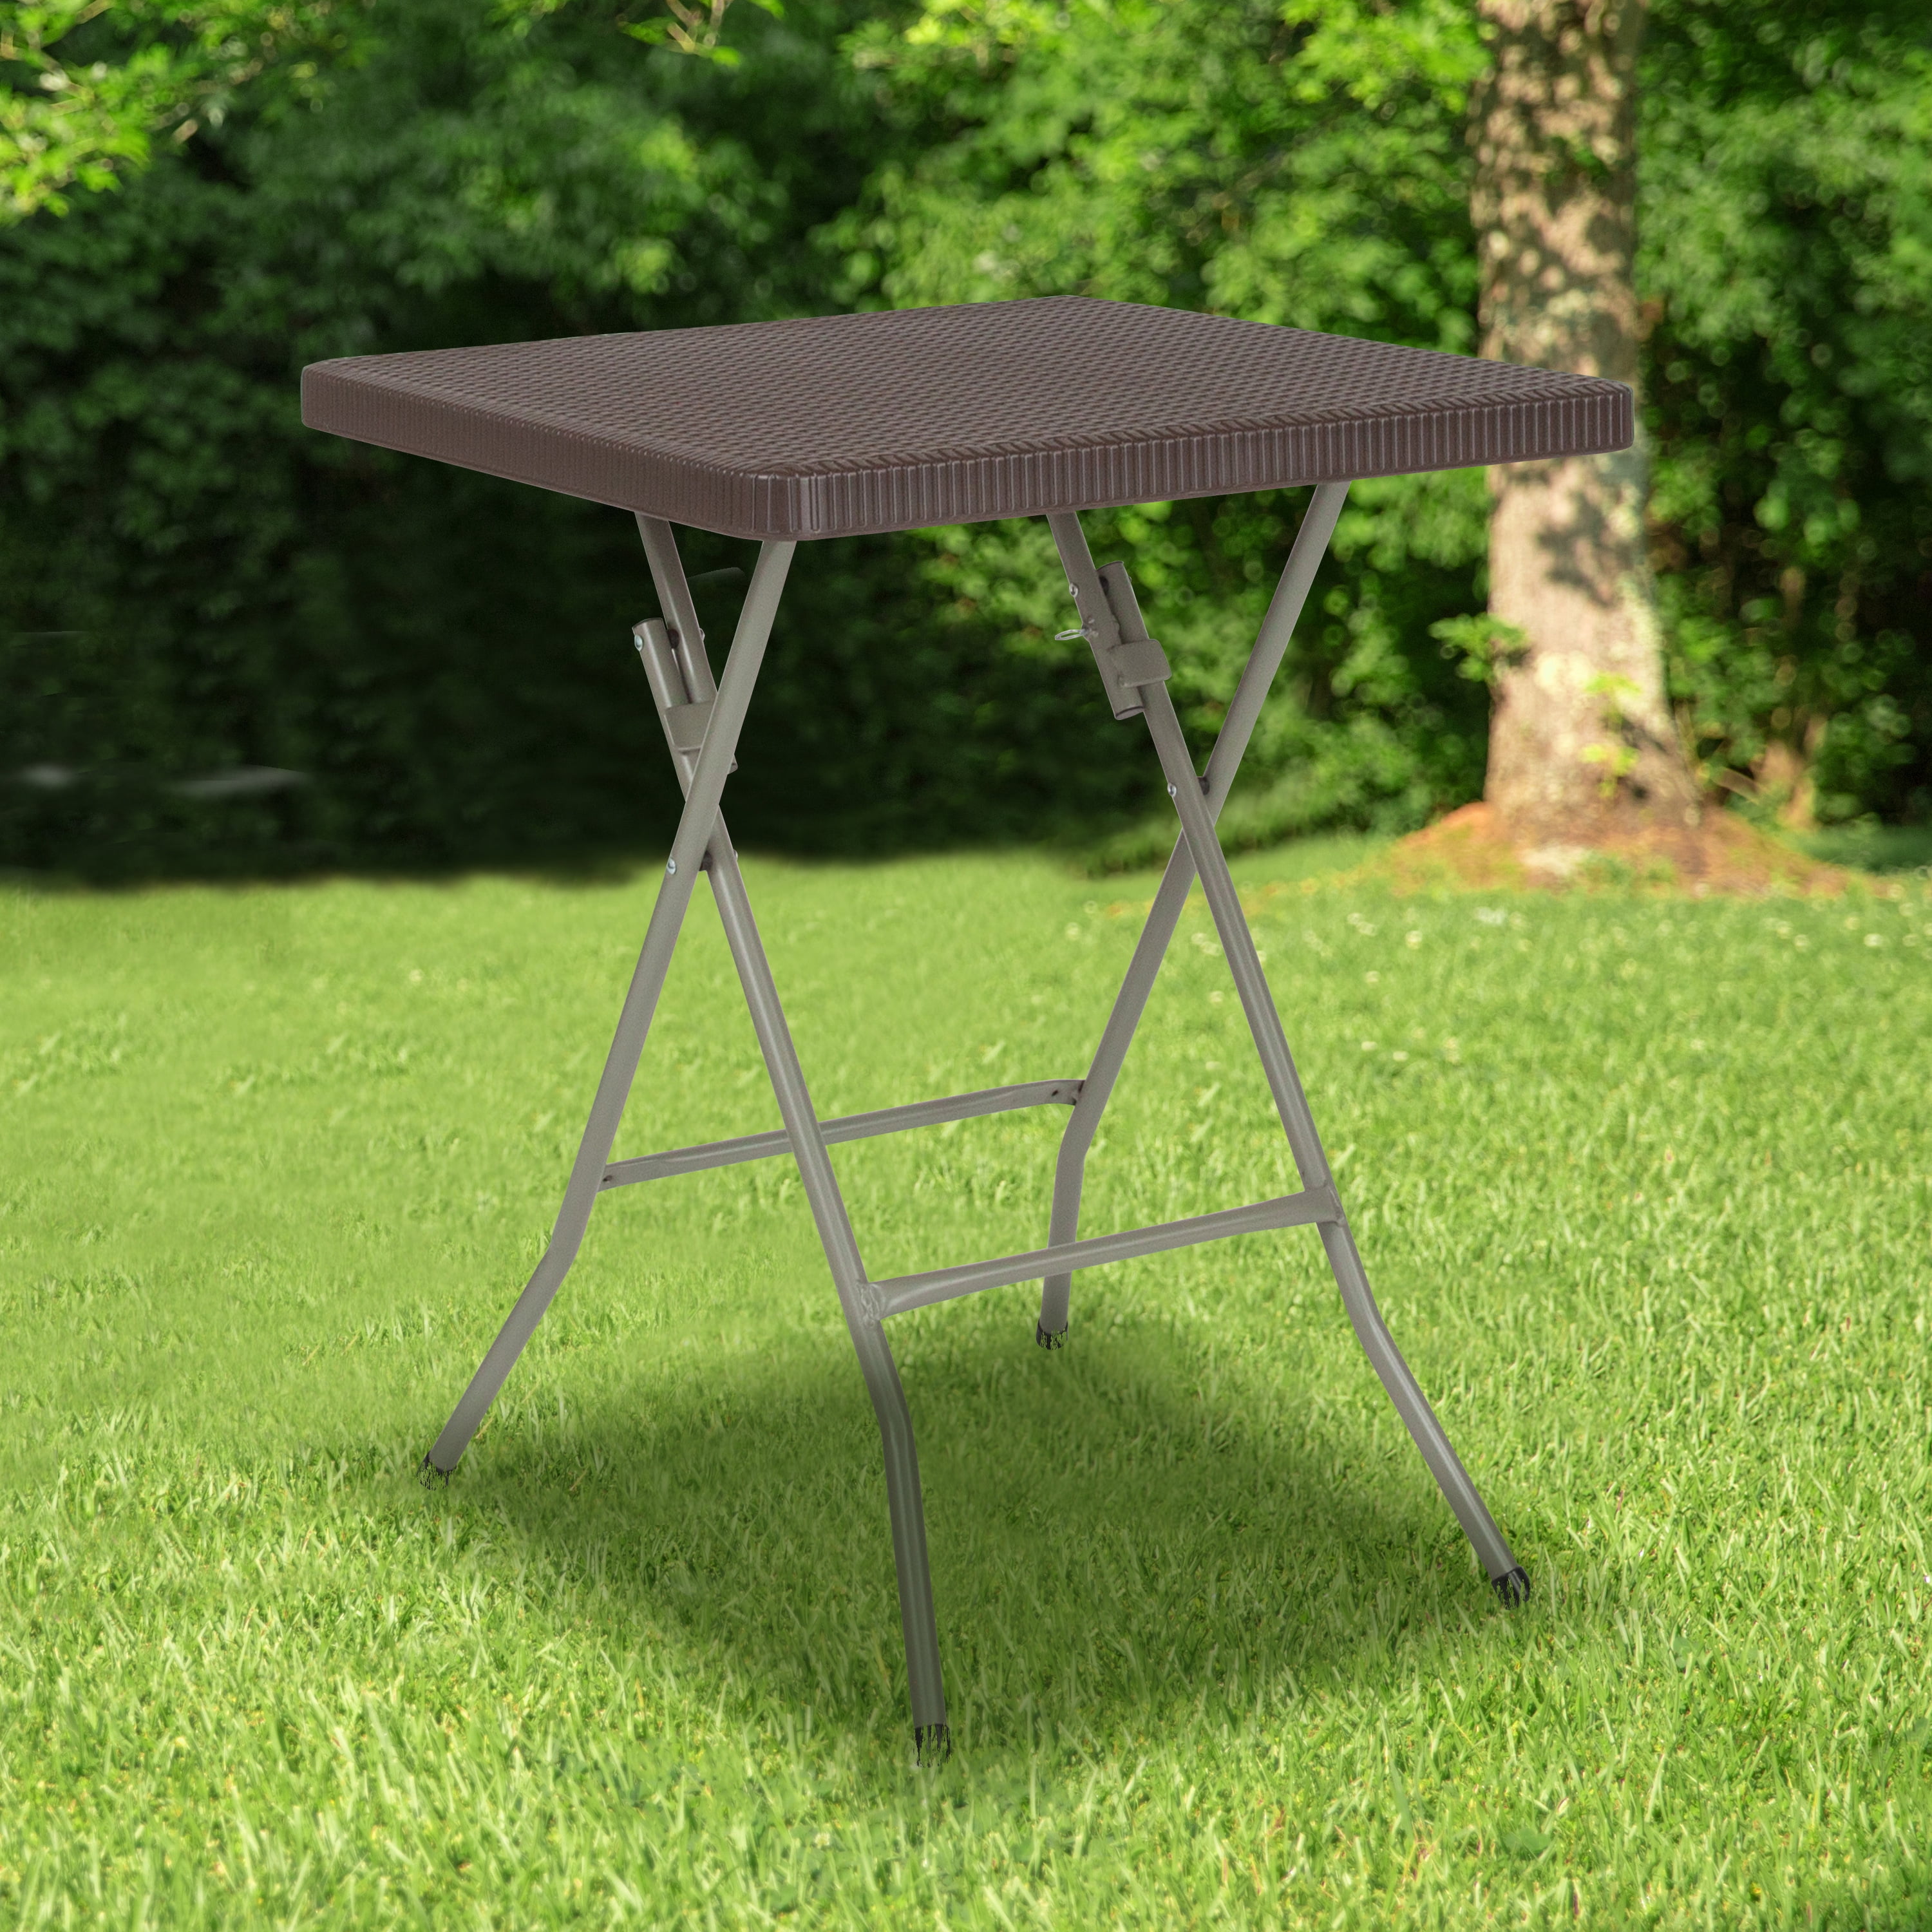 NEW BROWN 6FT FOLDING TABLE PORTABLE RATTAN CAMPING GARDEN PARTY CATERING HIKING 